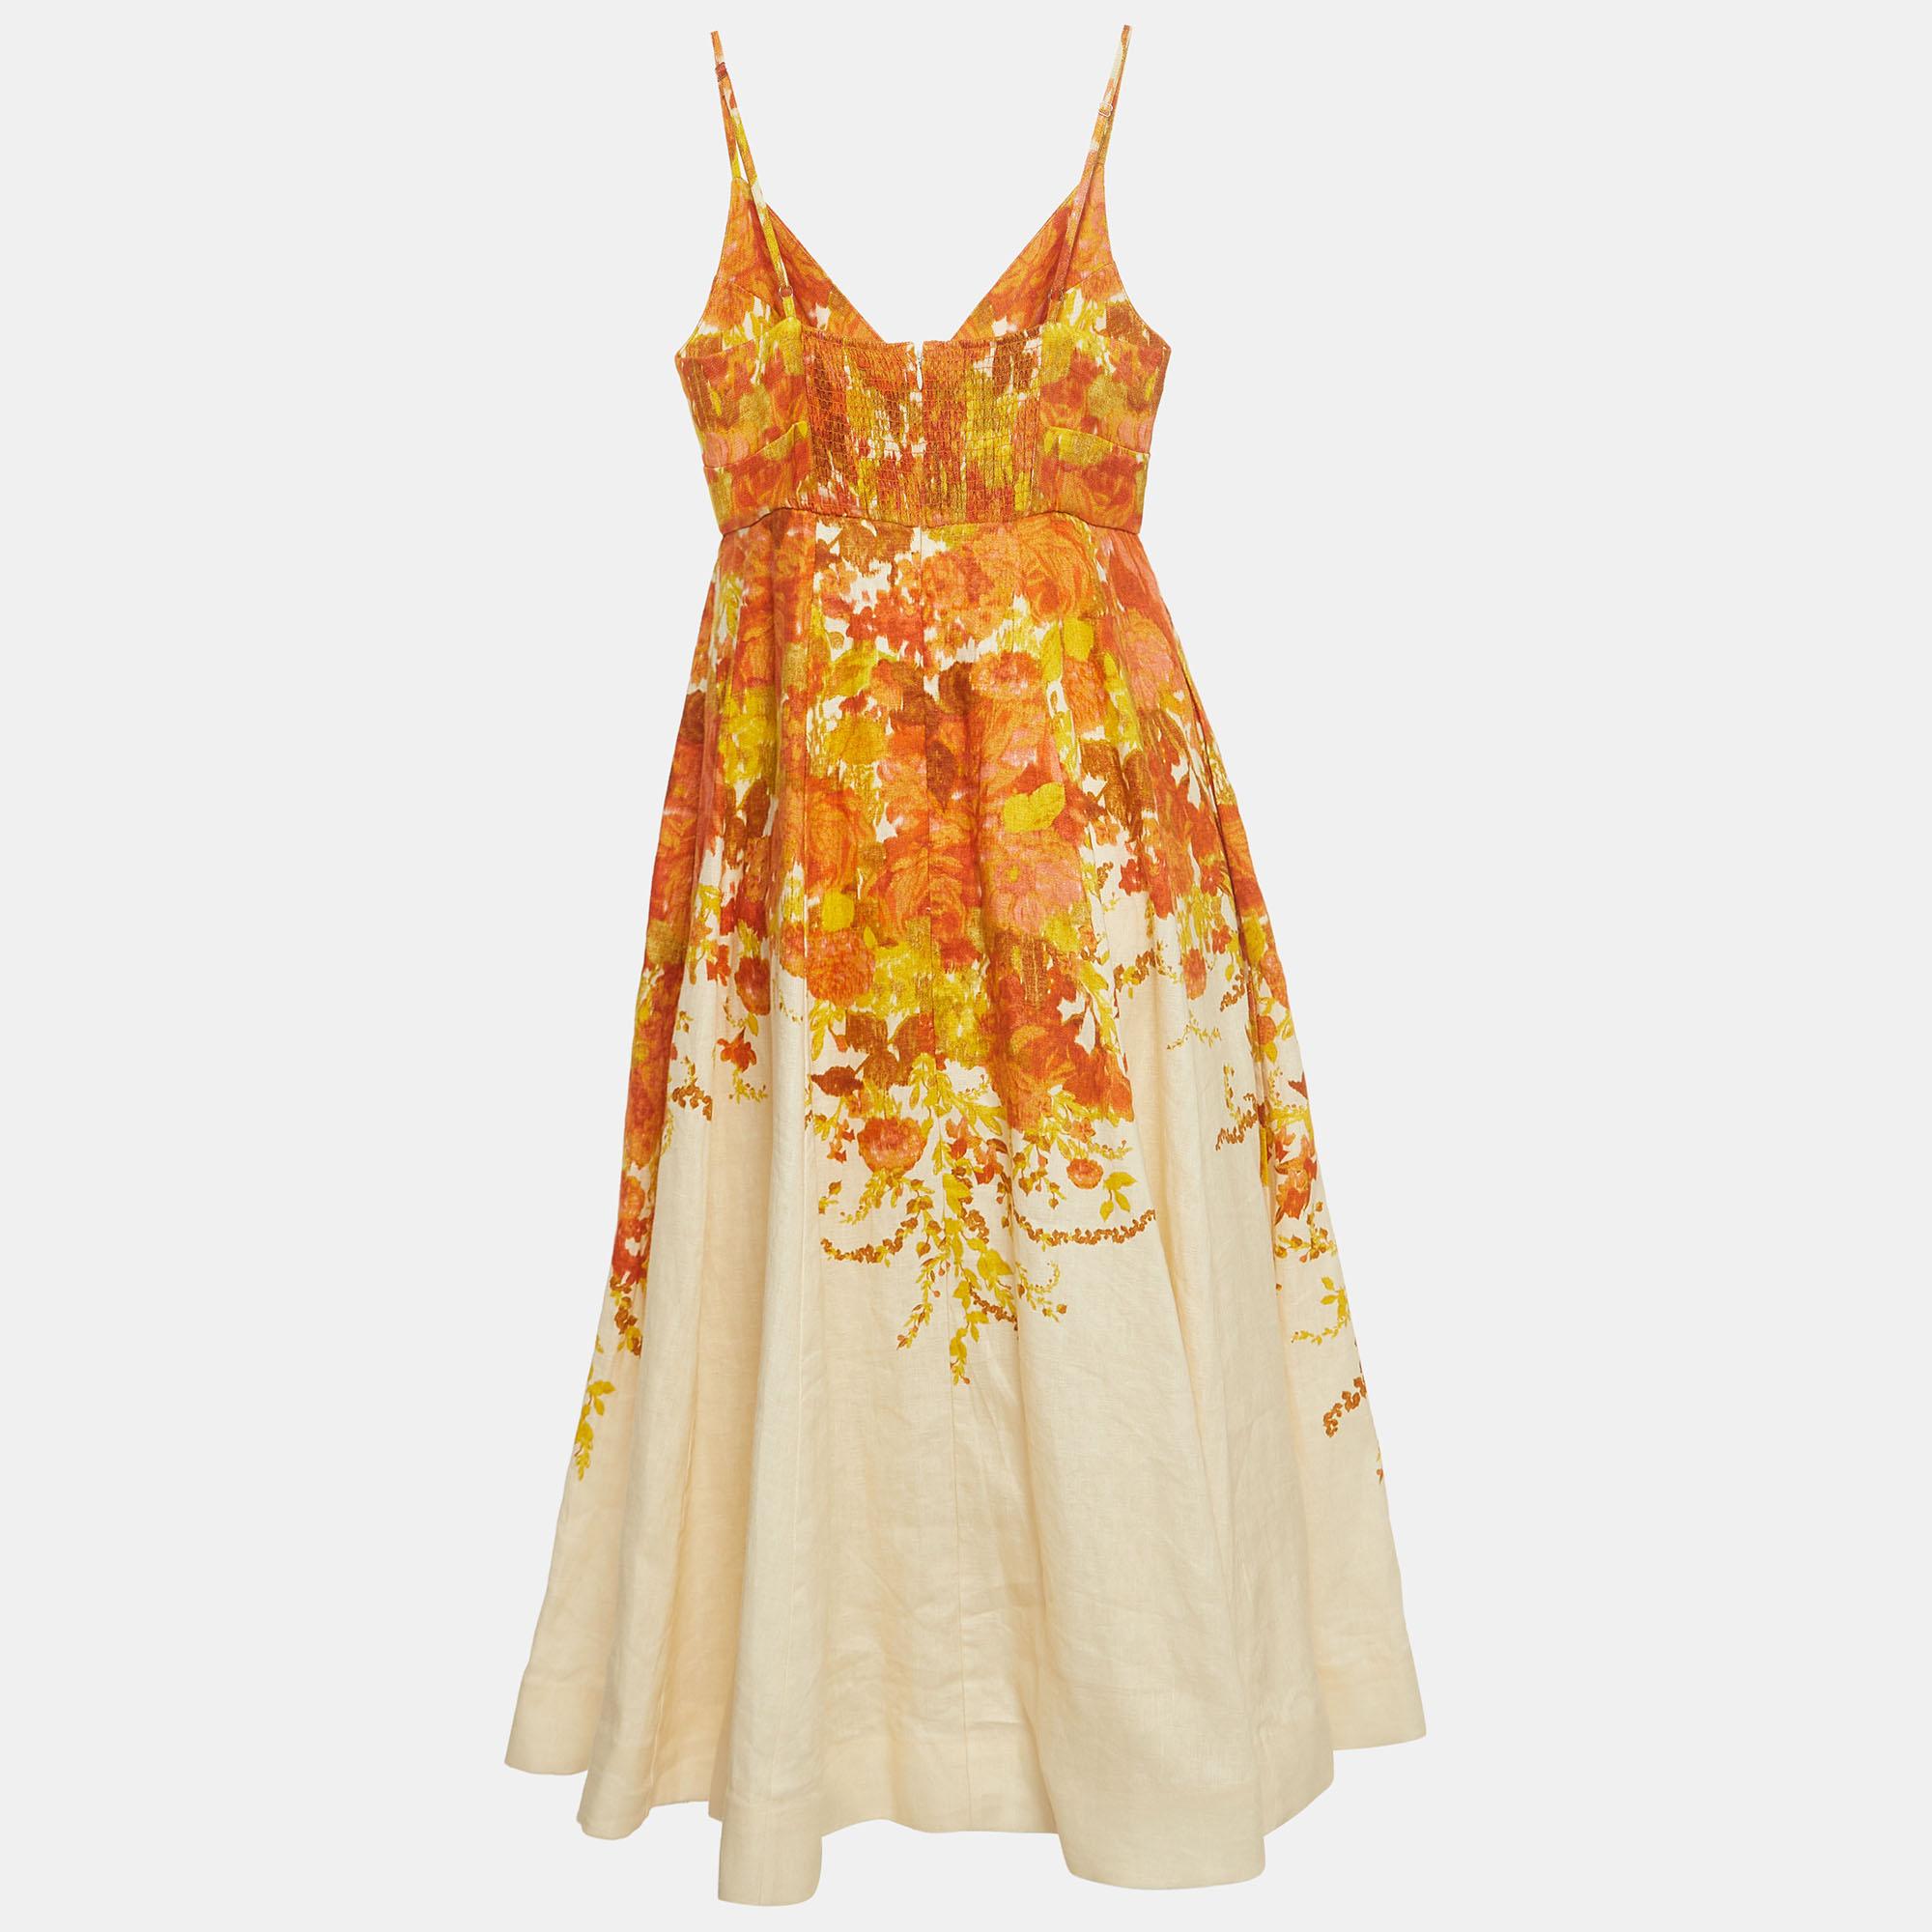 The Zimmermann midi dress is a delightful blend of sophistication and whimsy. Crafted from high-quality linen, the dress features a vibrant orange and cream print that exudes freshness. Its midi length adds a touch of elegance, making it a perfect